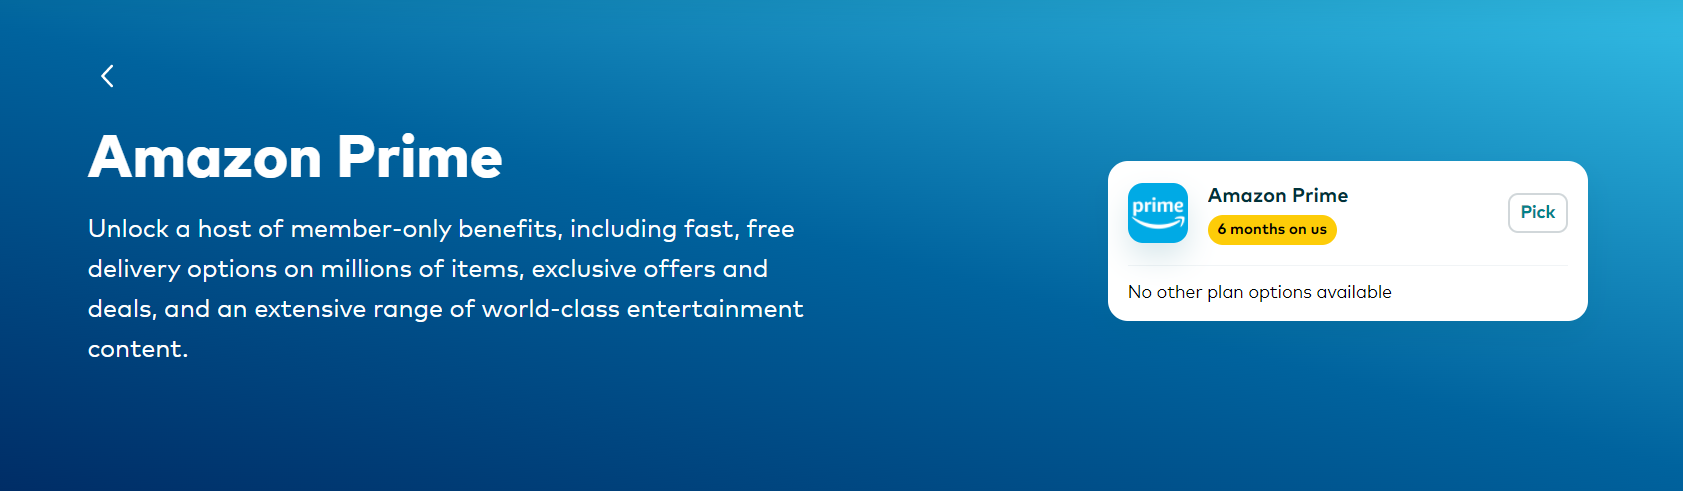 6 months FREE Amazon Prime for existing Optus postpaid customers at Optus Subhub